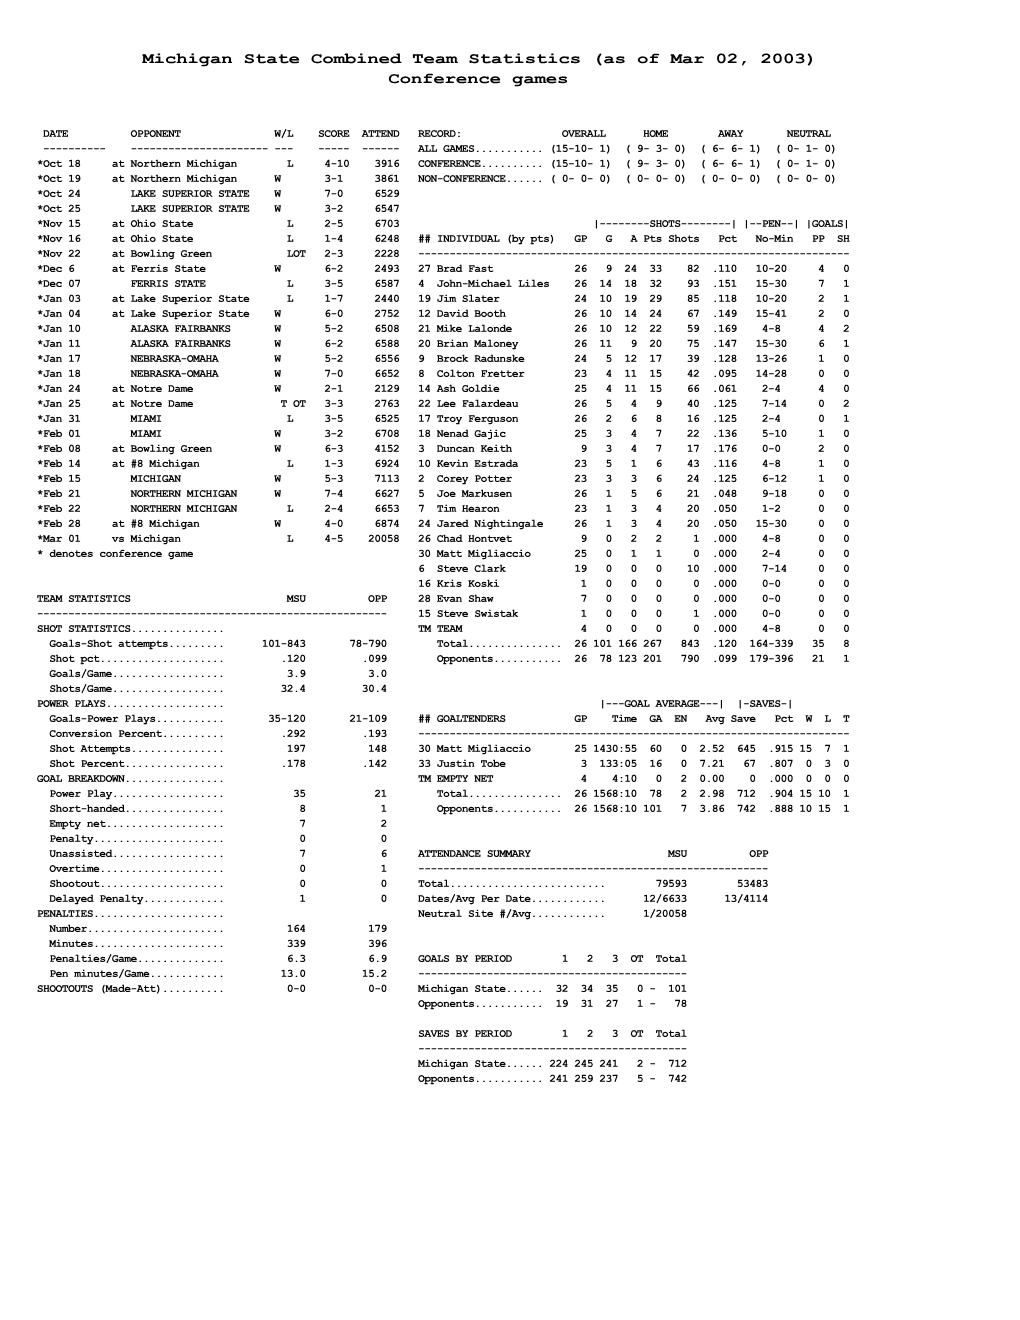 Michigan State Combined Team Statistics (As of Mar 02, 2003) Conference Games